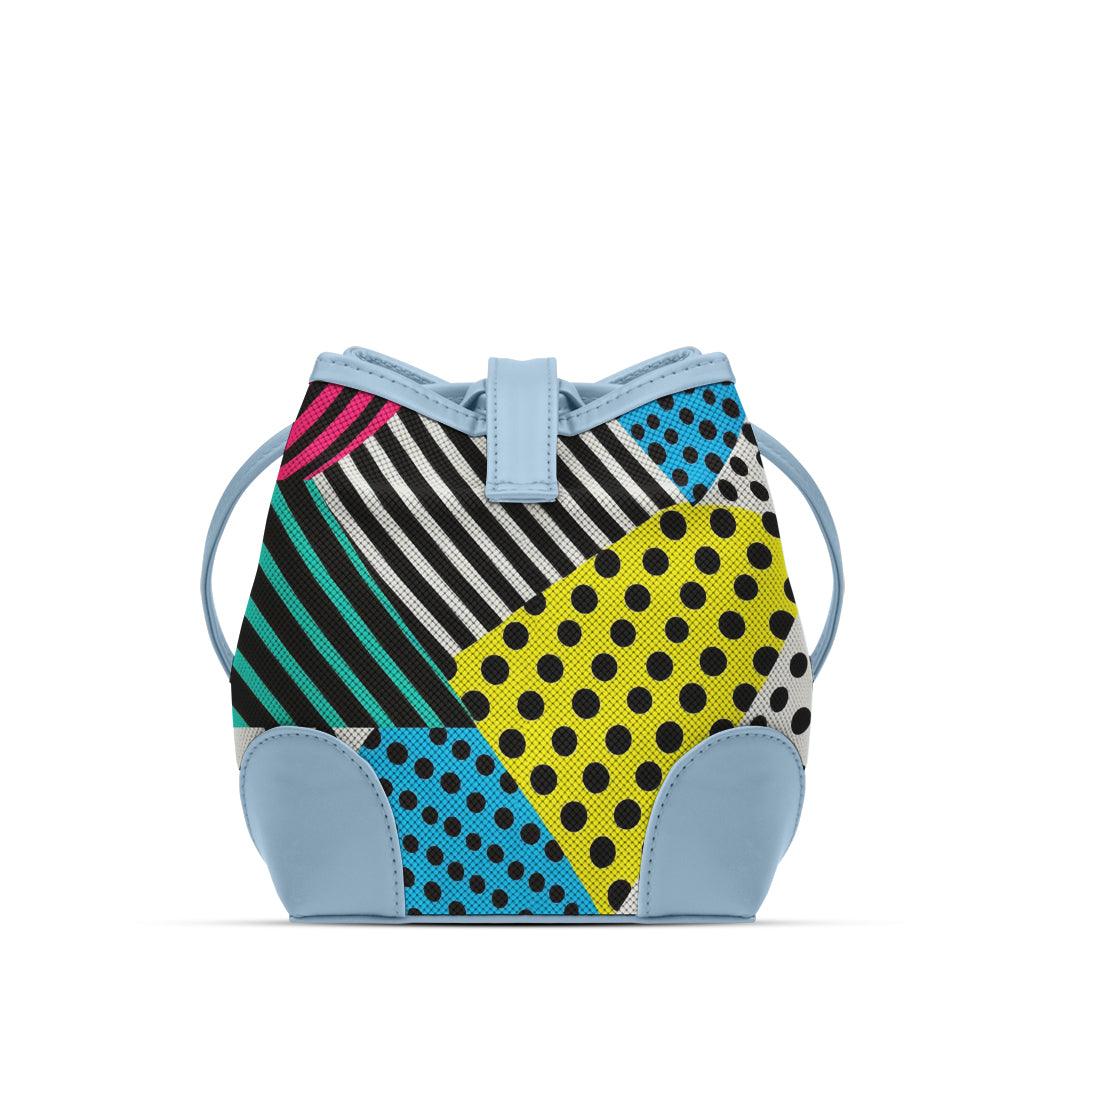 Blue Bucket Bags Patterns - CANVAEGYPT